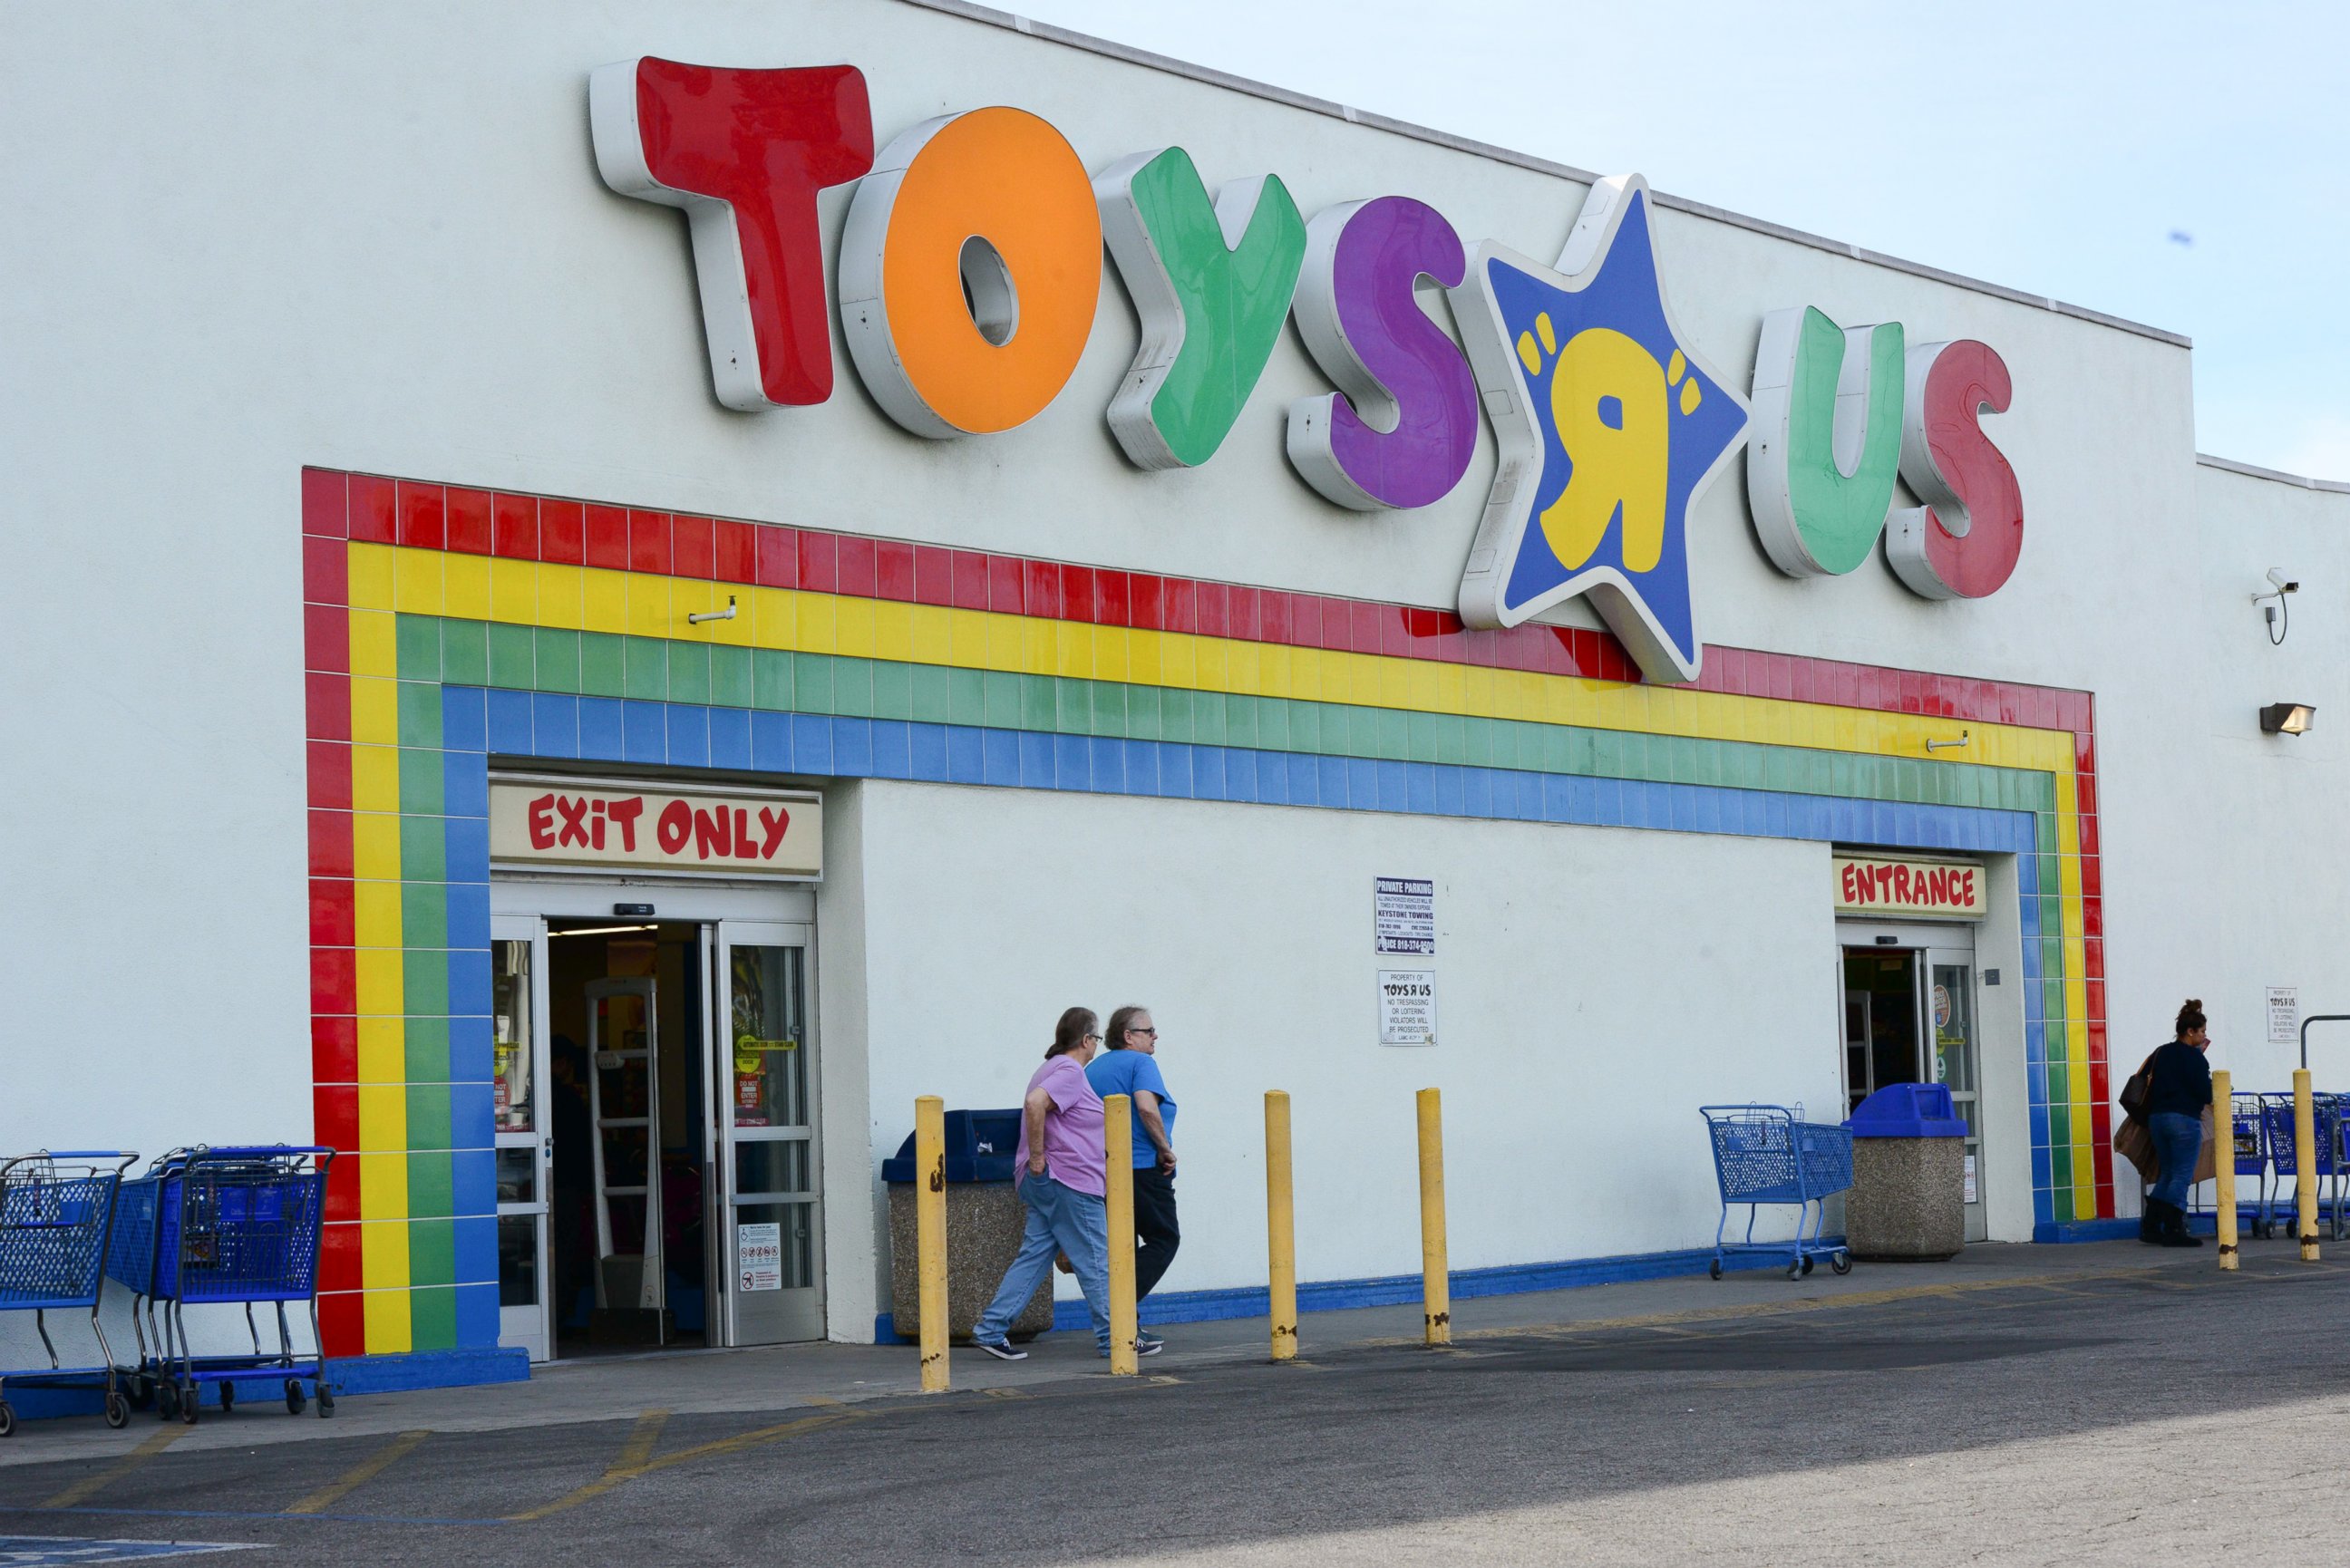 PHOTO: A file photo from 2013 shows a Toys 'R' Us store located in Los Angeles, Calif.